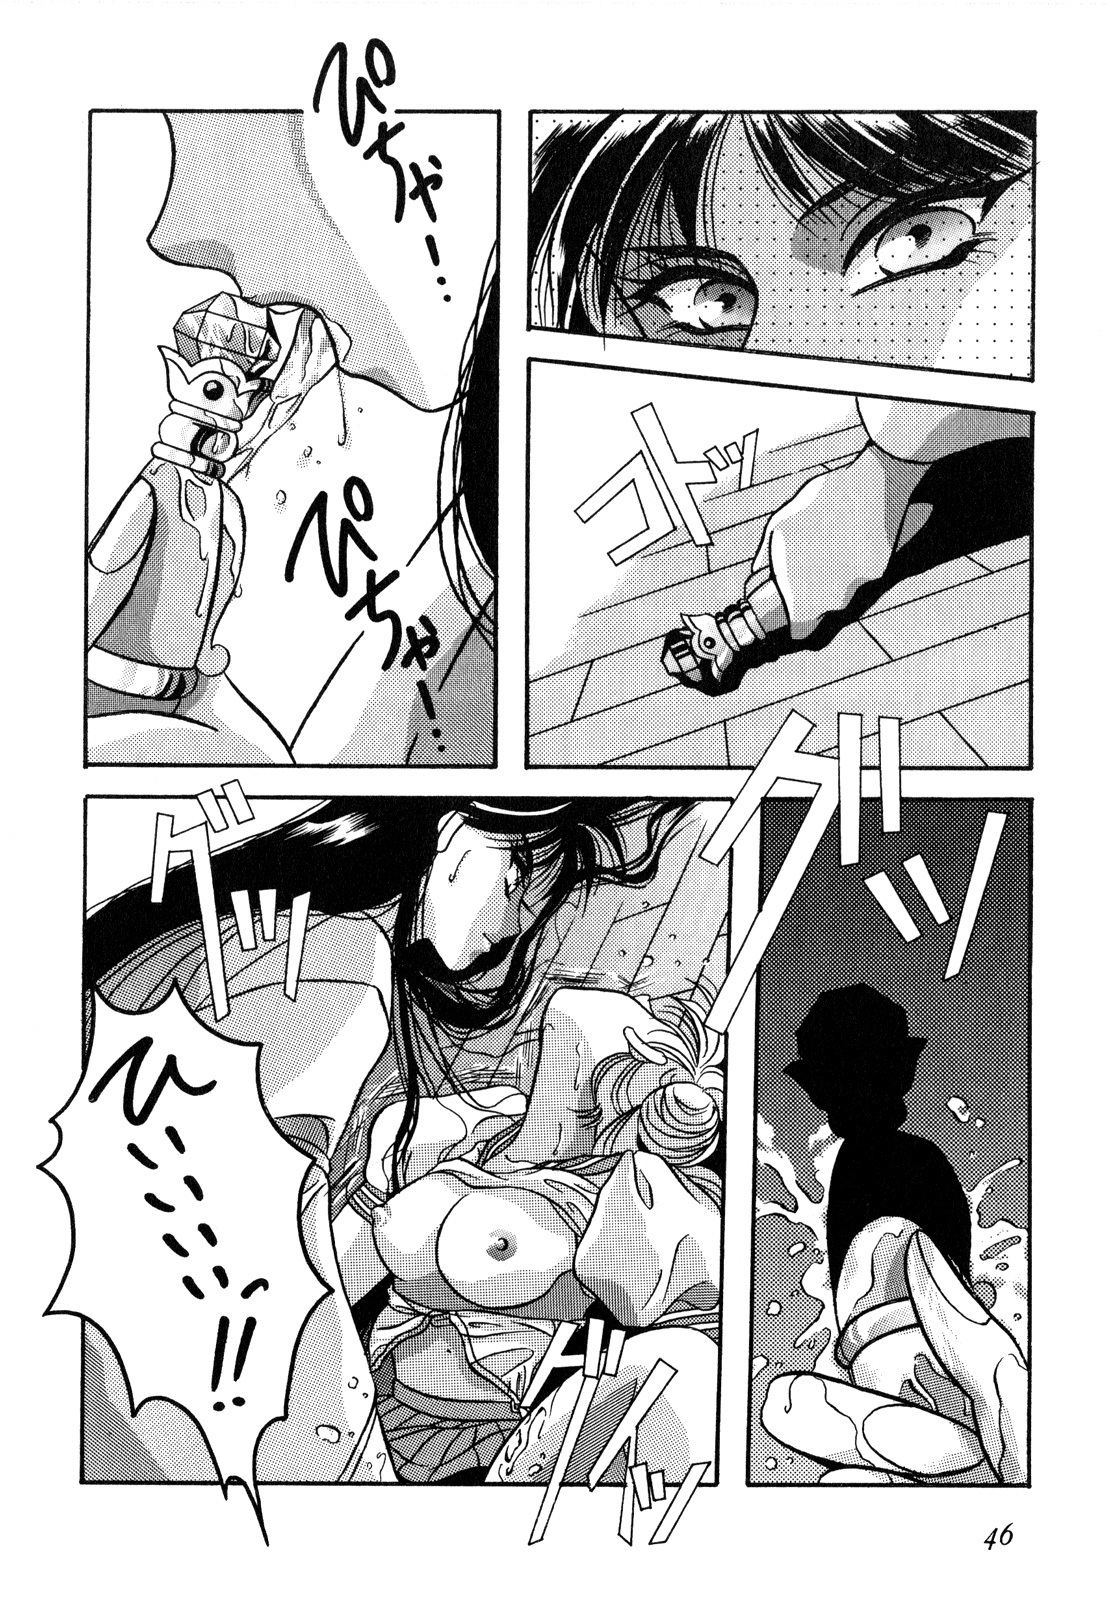 [Anthology] Lunatic Party 2 (Sailor Moon) page 47 full